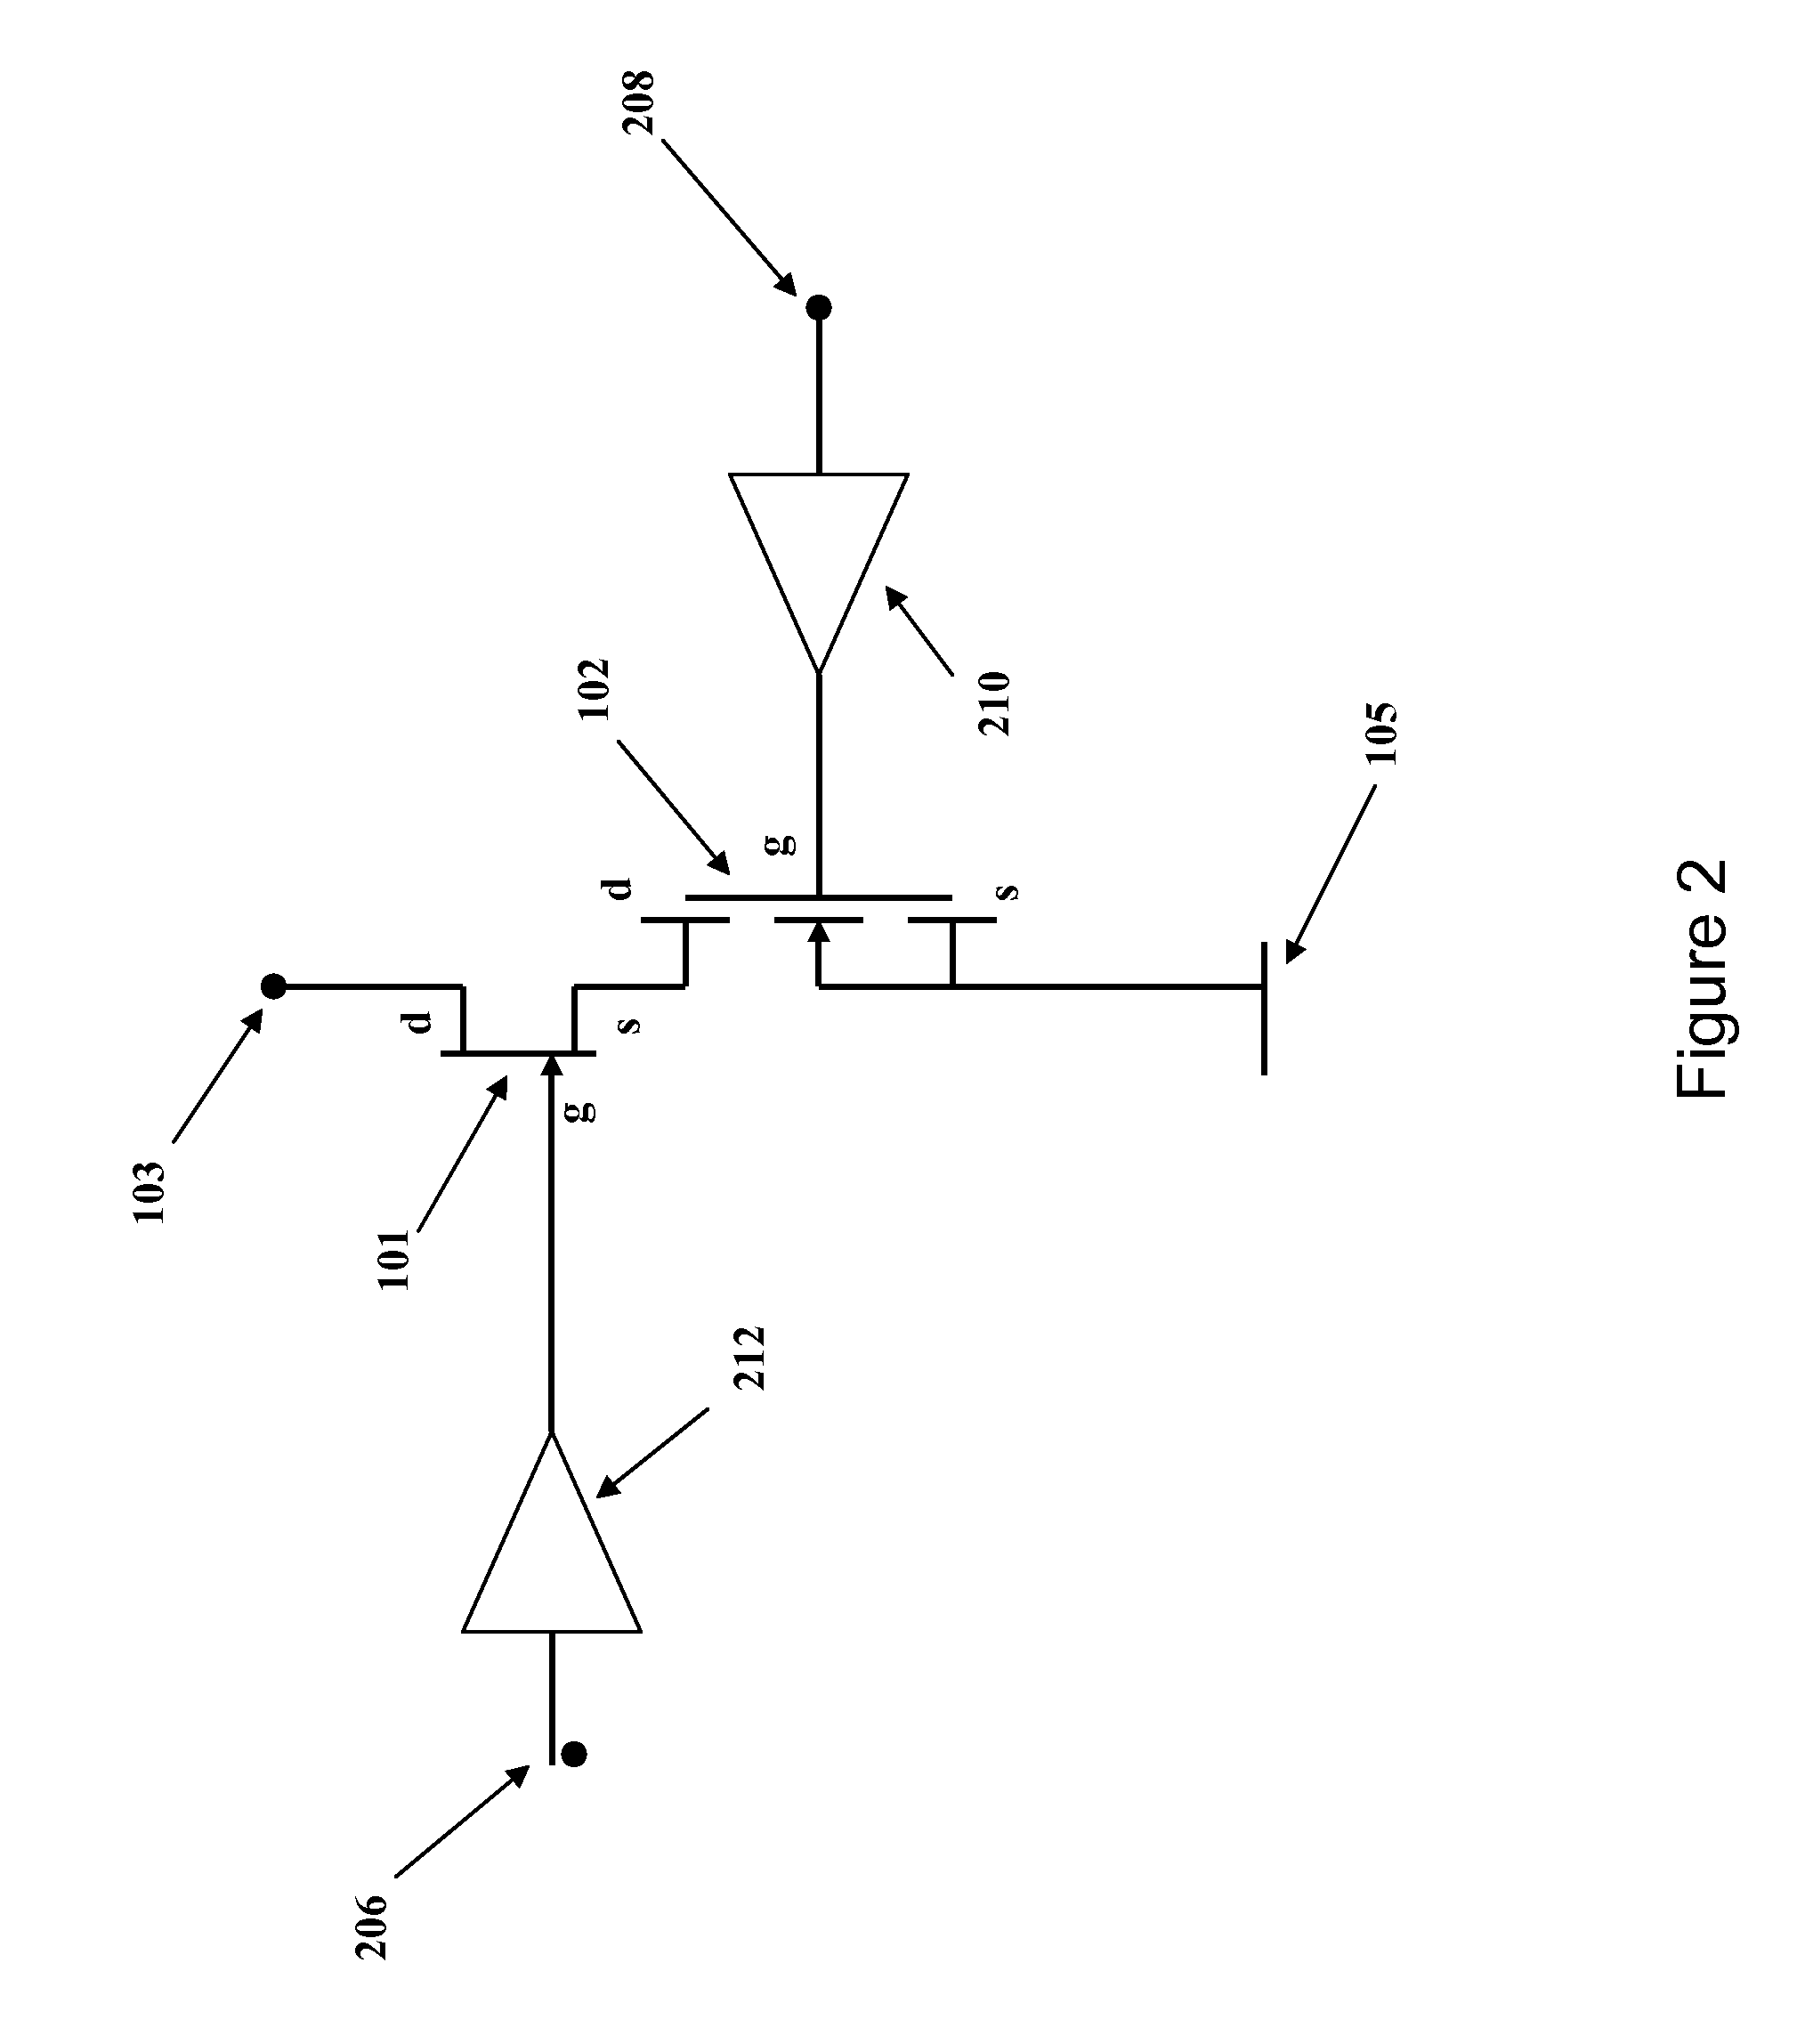 Simplified switching circuit